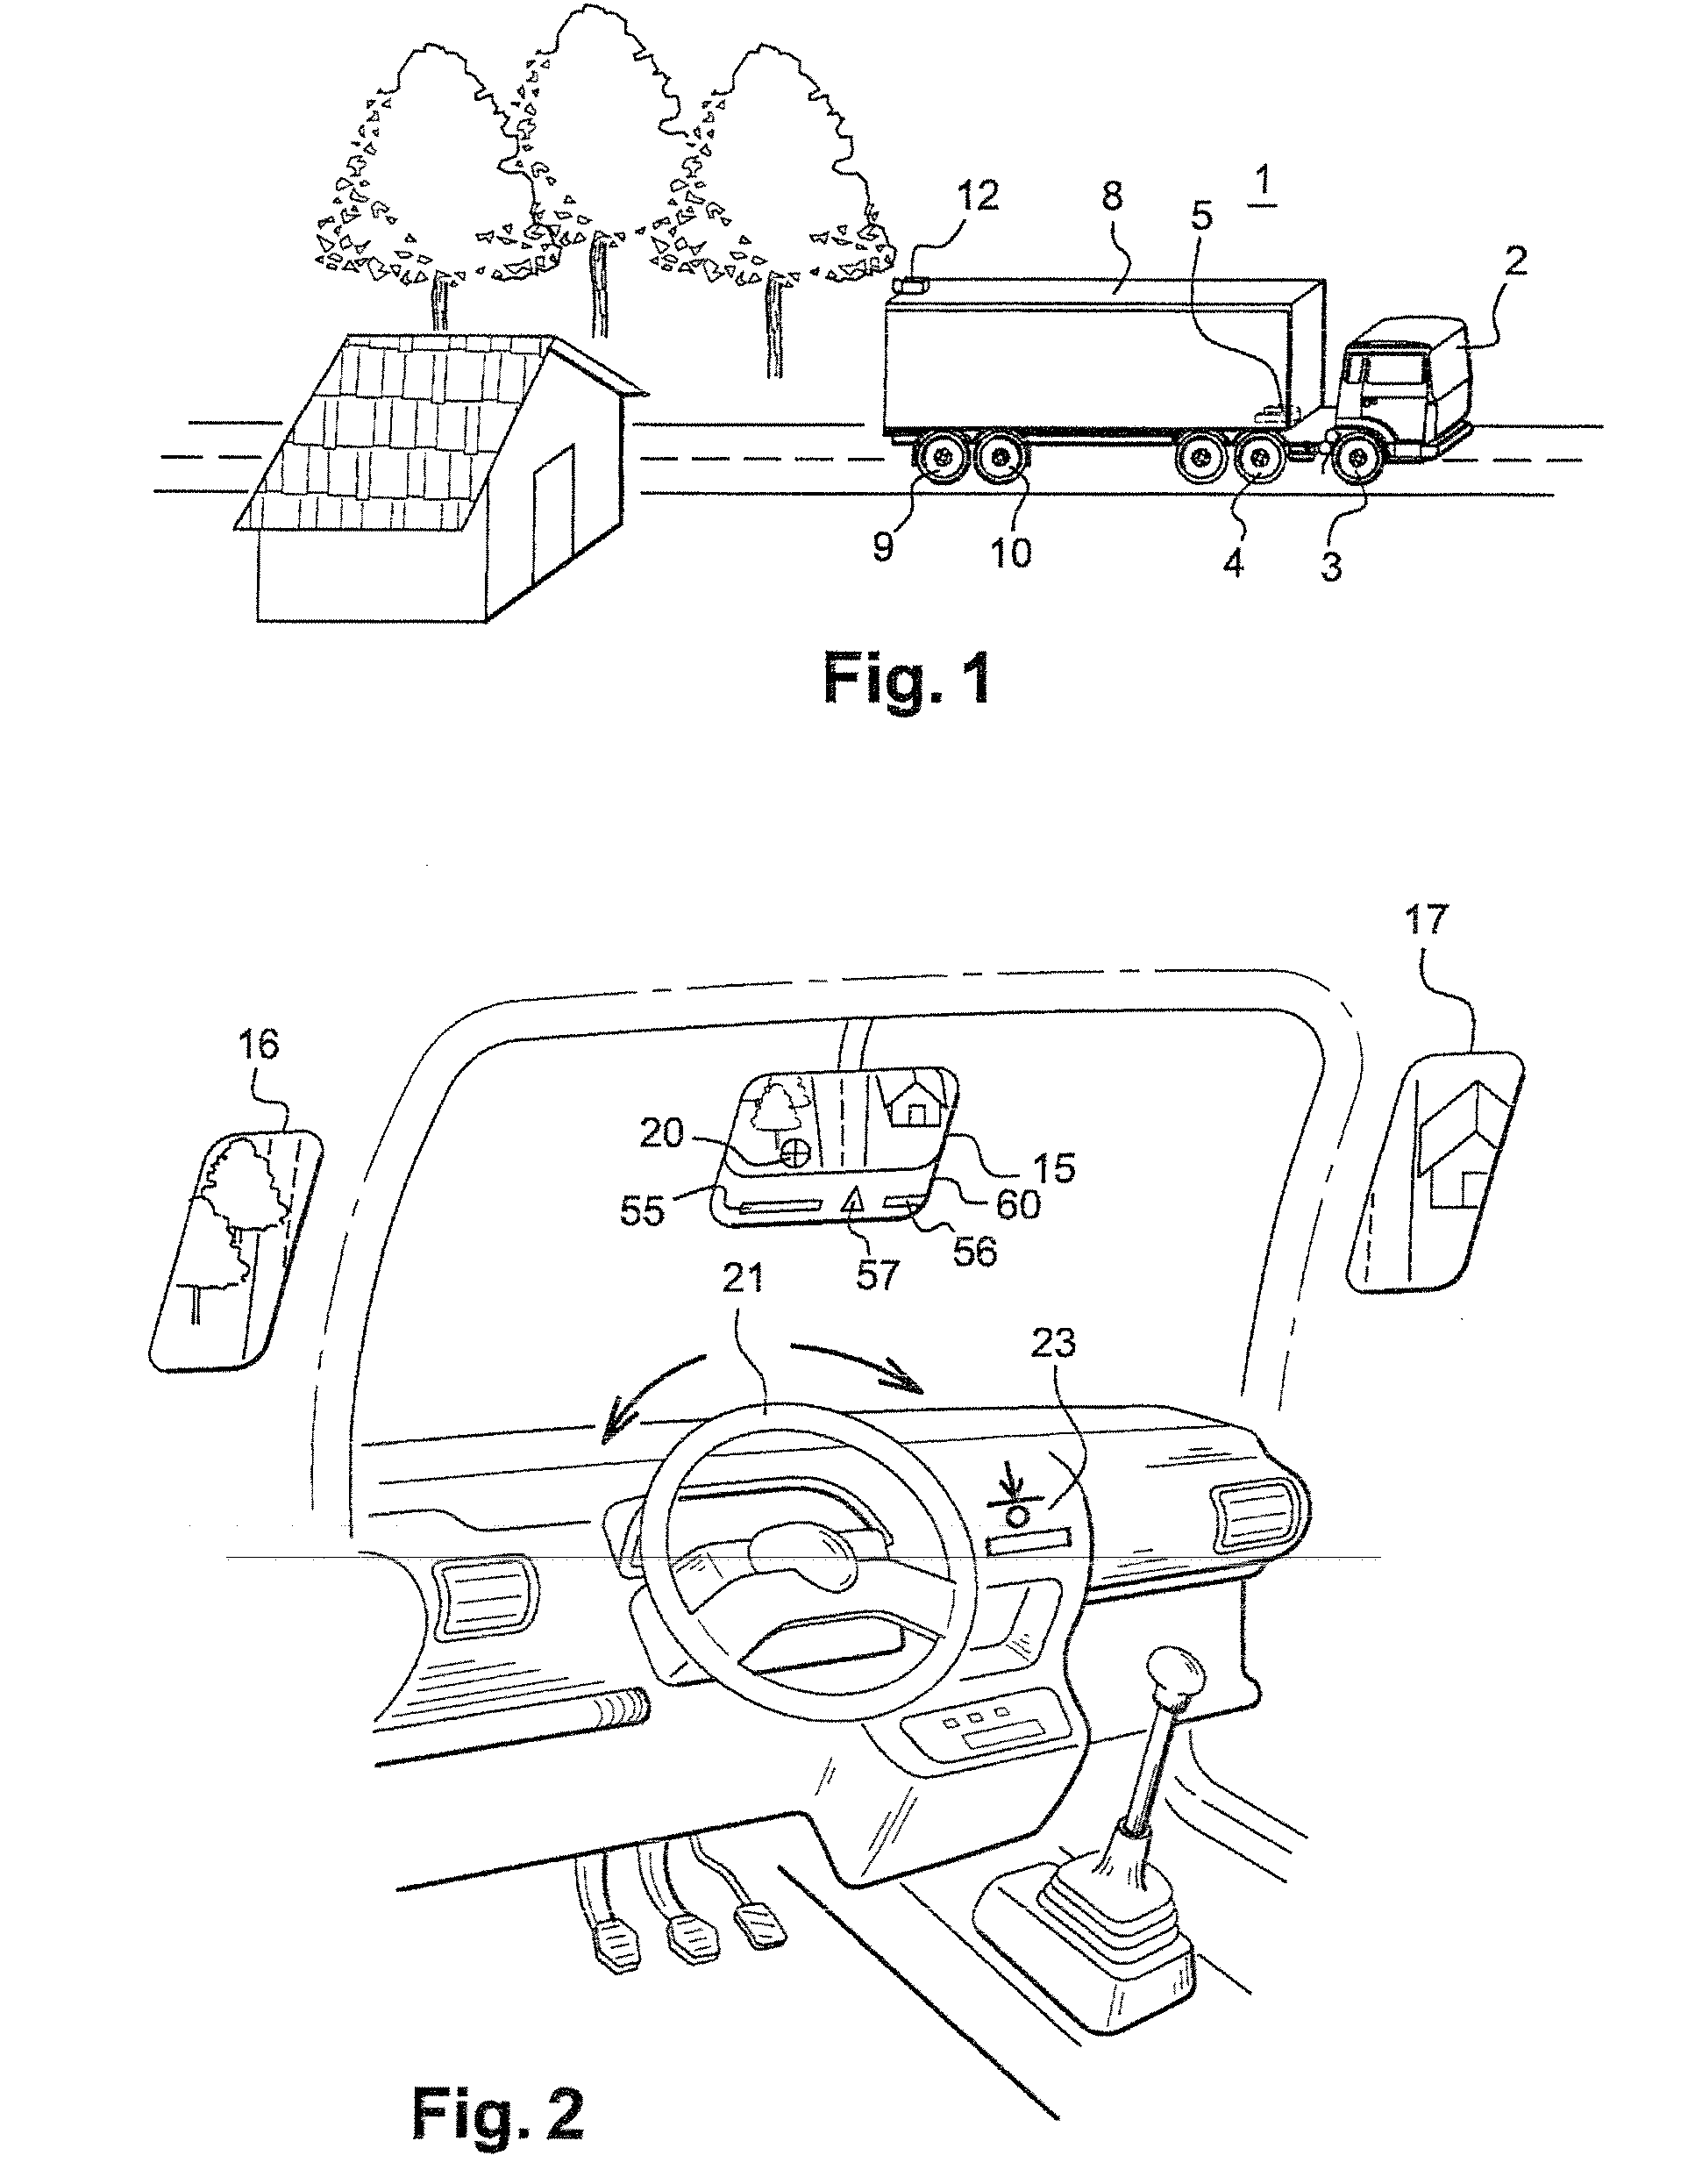 Method for determining a set steering angle of steered wheels of a vehicle